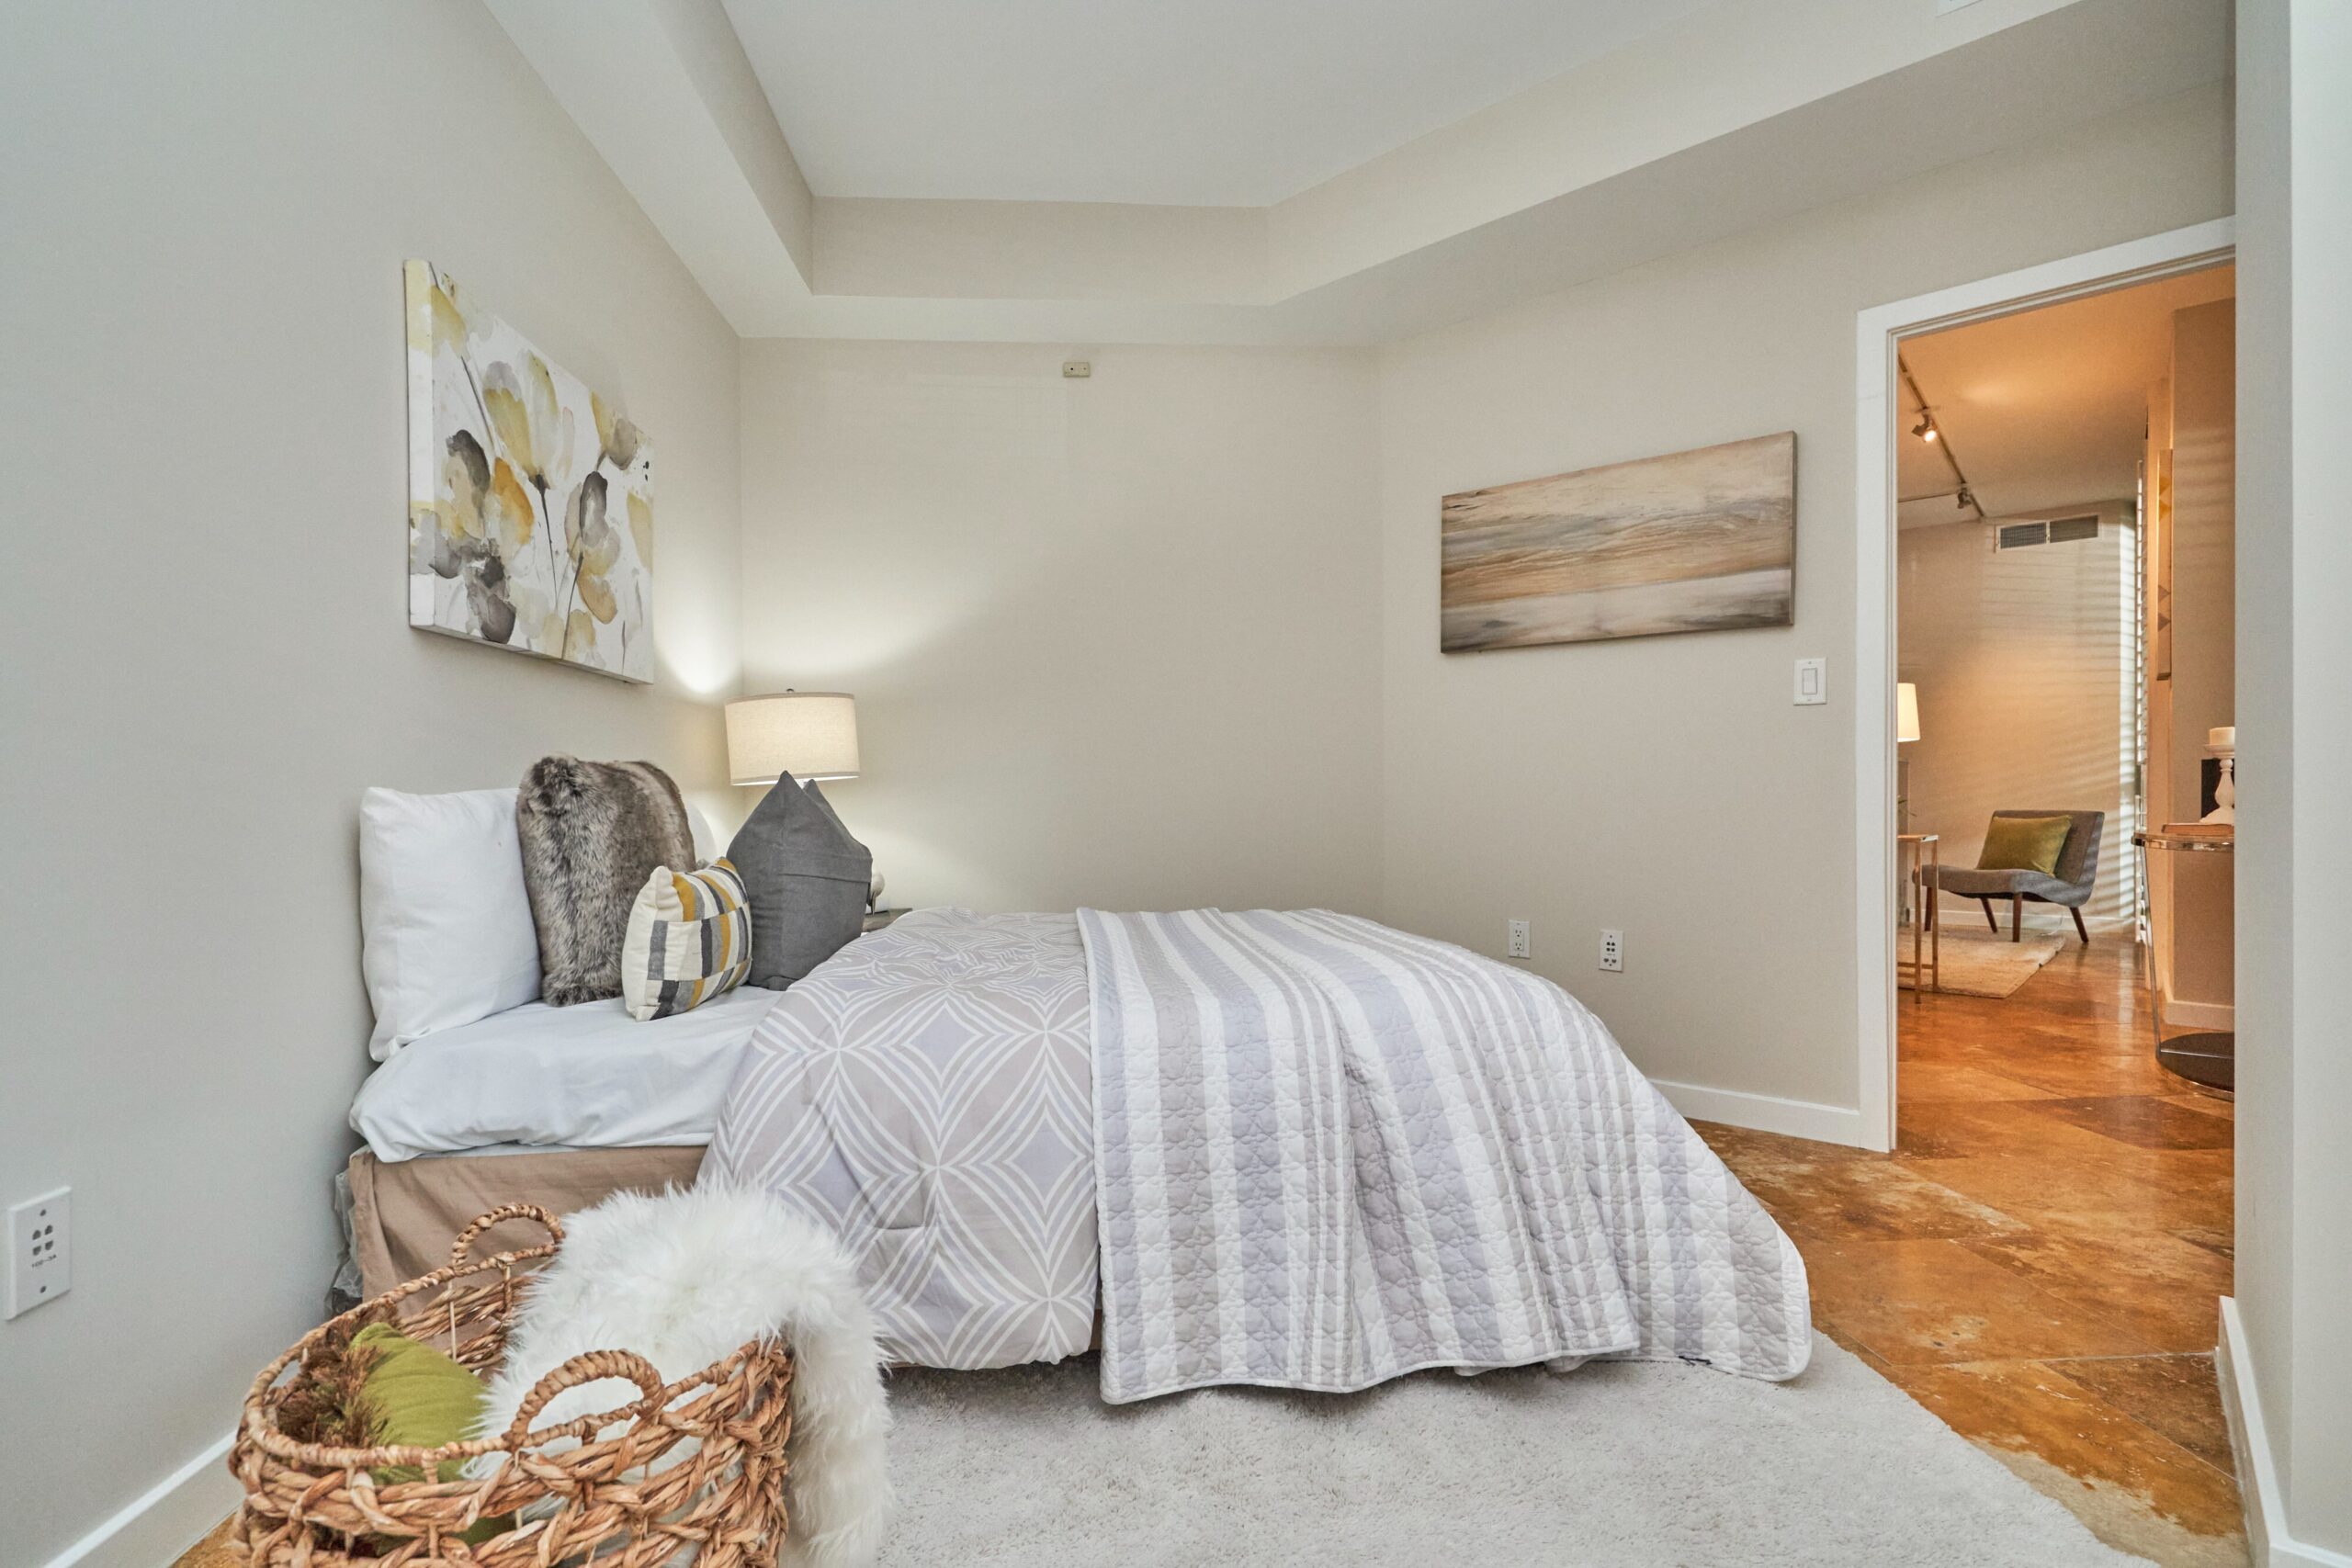 Professional interior photo of 1300 13th St NW #102, Washington DC - showing the second bedroom with tray ceiling and marble floors and unique angles